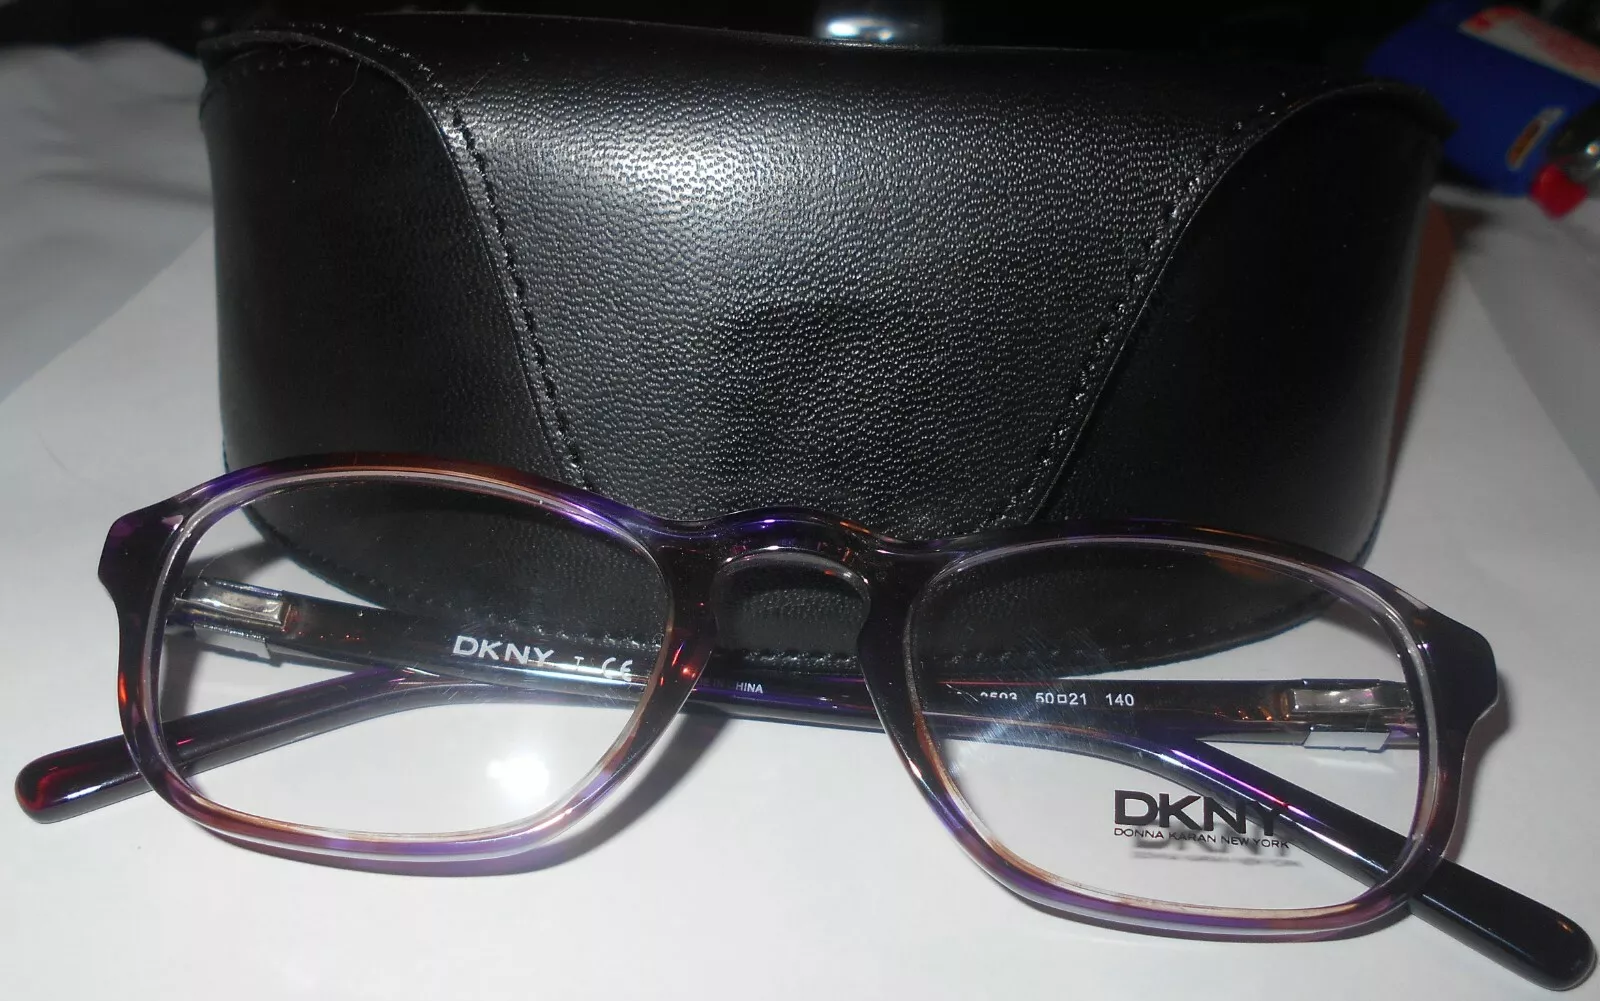 DNKY Glasses/Frames 4632 3593 50 21 140 -new with case - brand new - $25.00